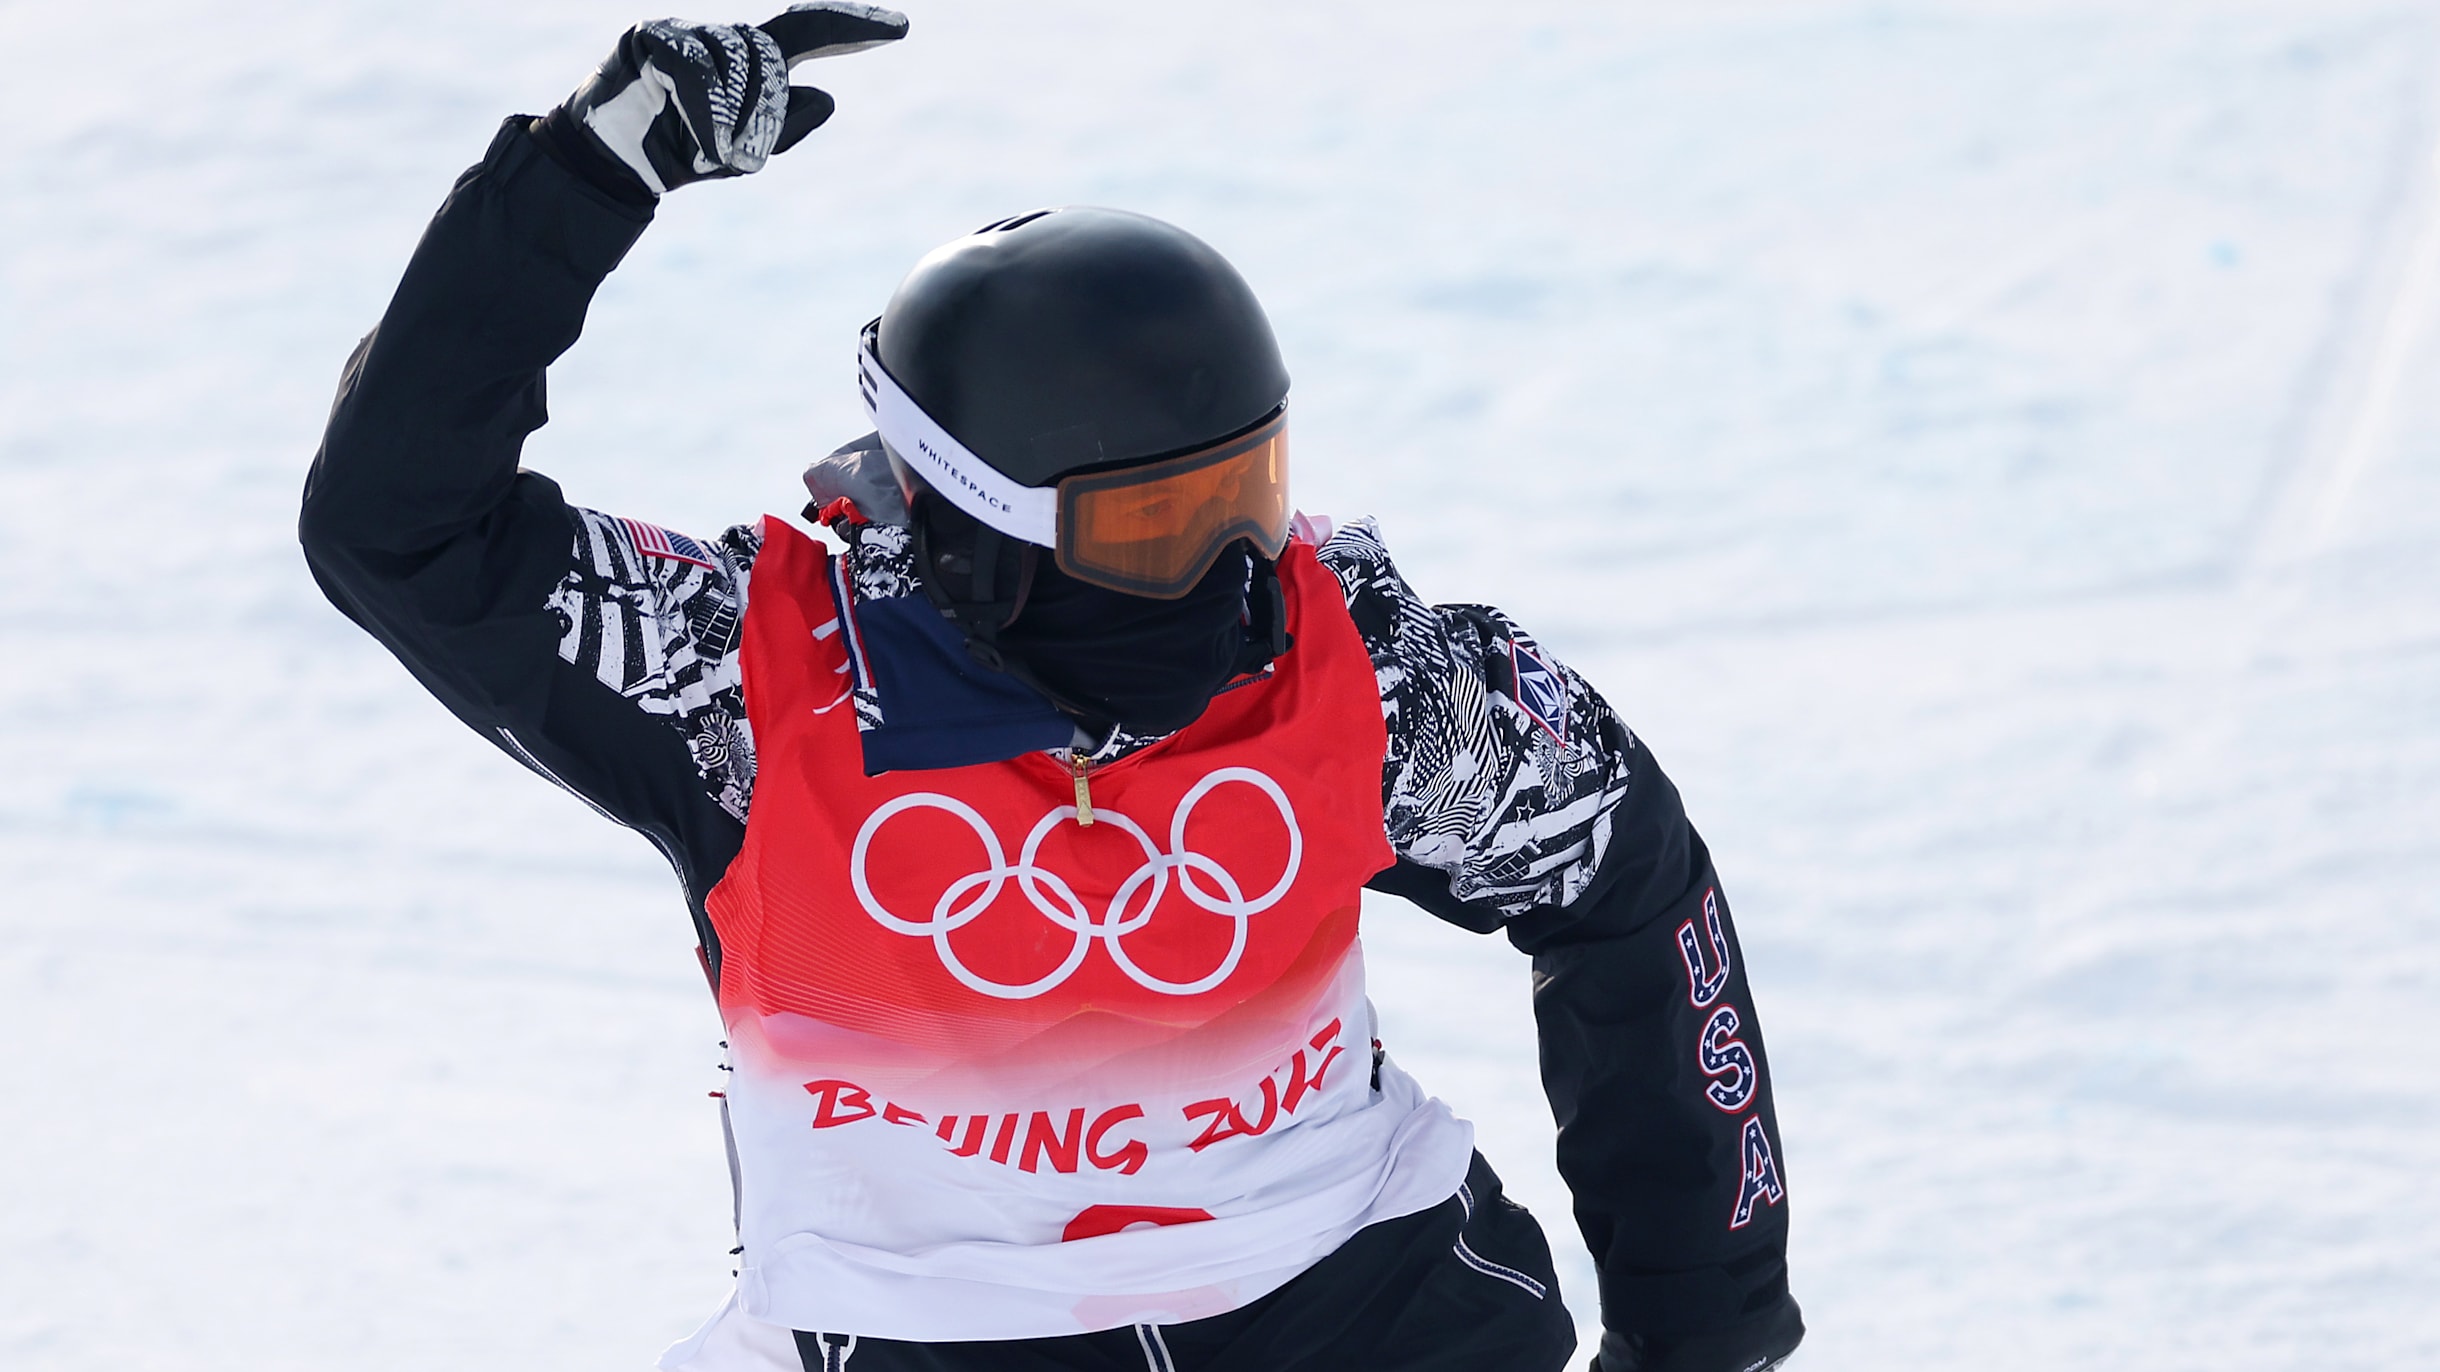 Shaun White says Beijing Winter Olympics in 2022 will likely be his last